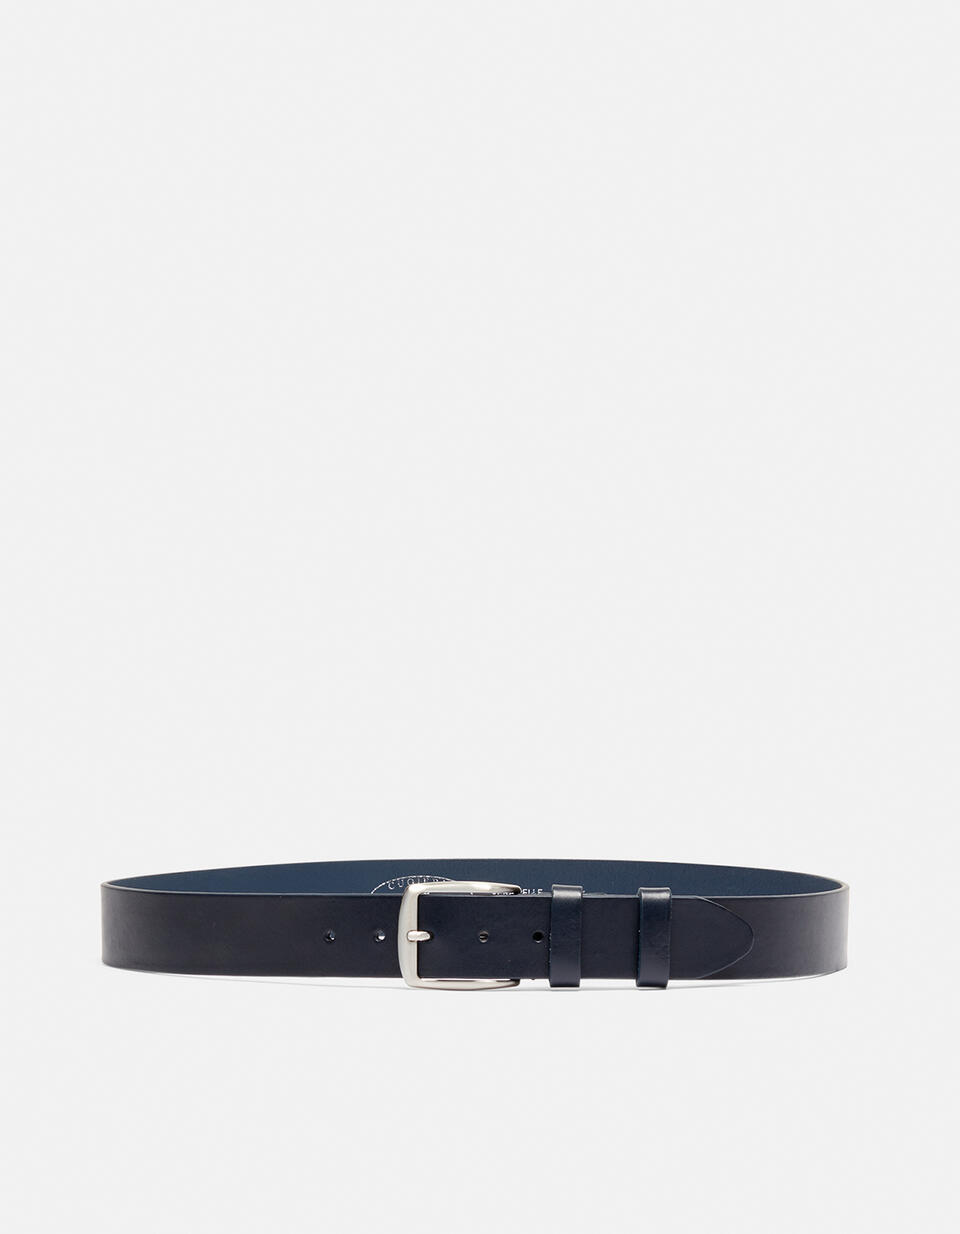 CLASSIC LEATHER BELT WITHOUT SEAMS HEIGHT 4,0 CM - Men Belts | Belts BLU - Men Belts | BeltsCuoieria Fiorentina